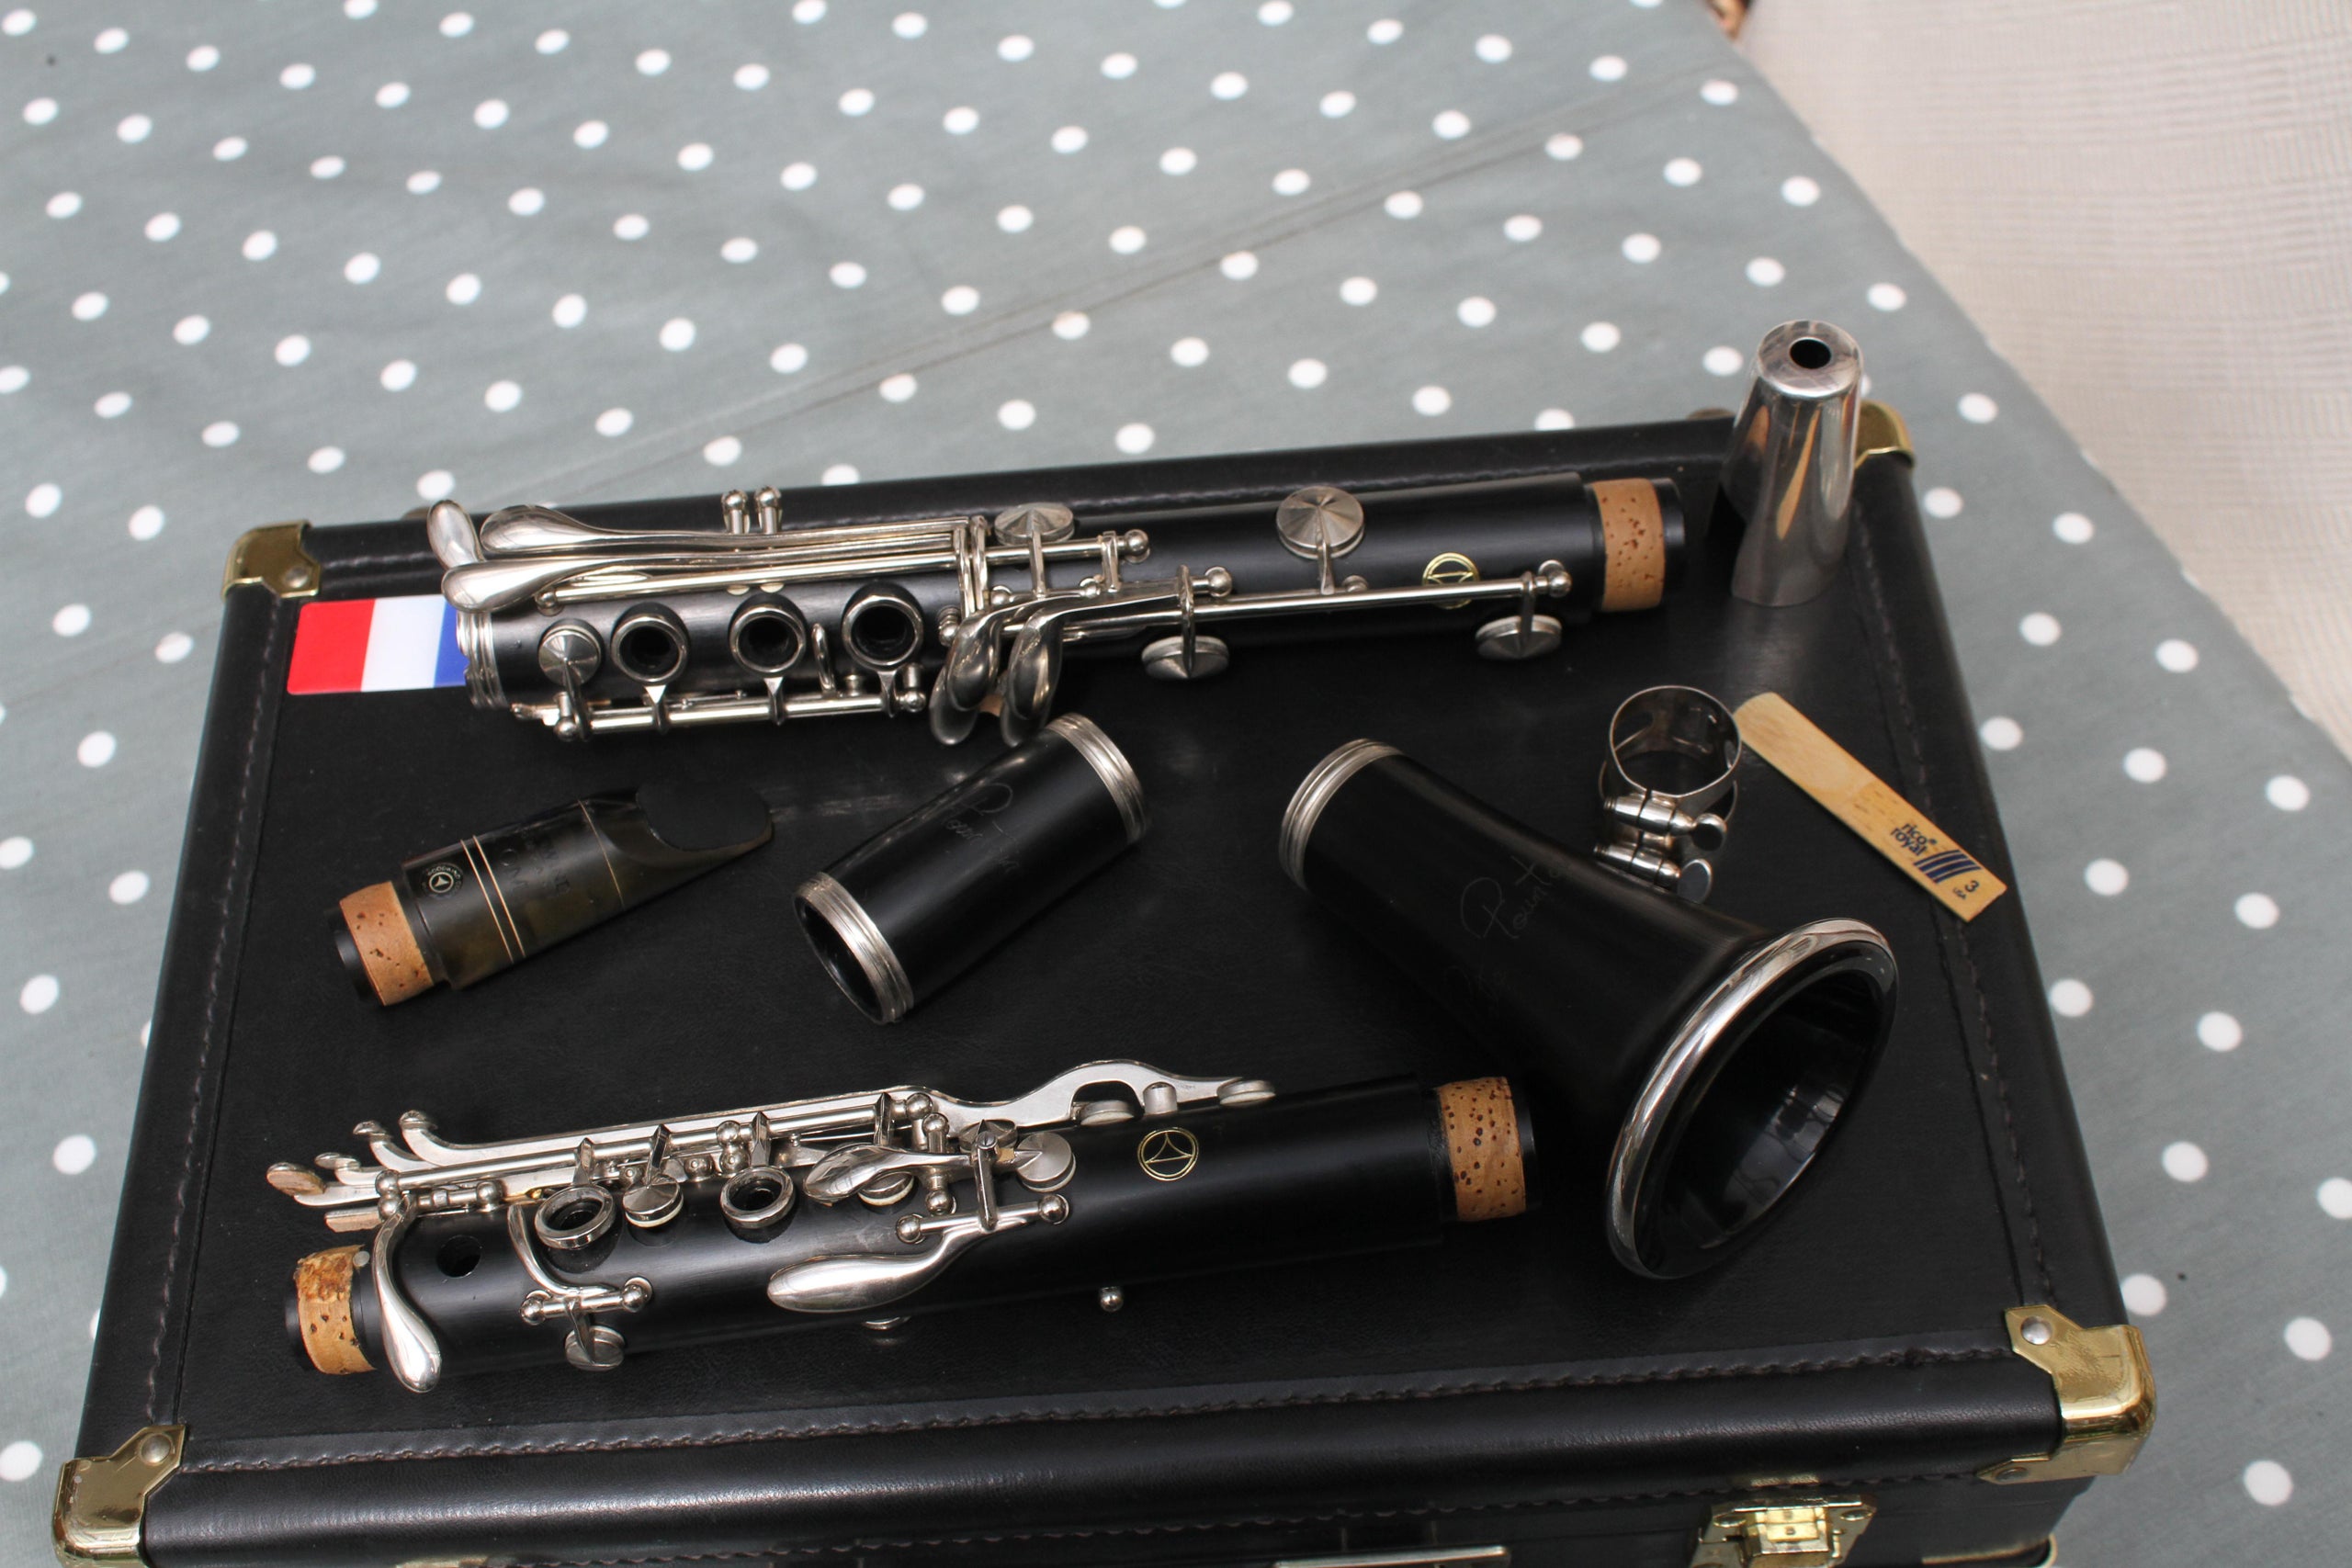 Clarinet Supplies - PlayNick Bb Mouthpieces